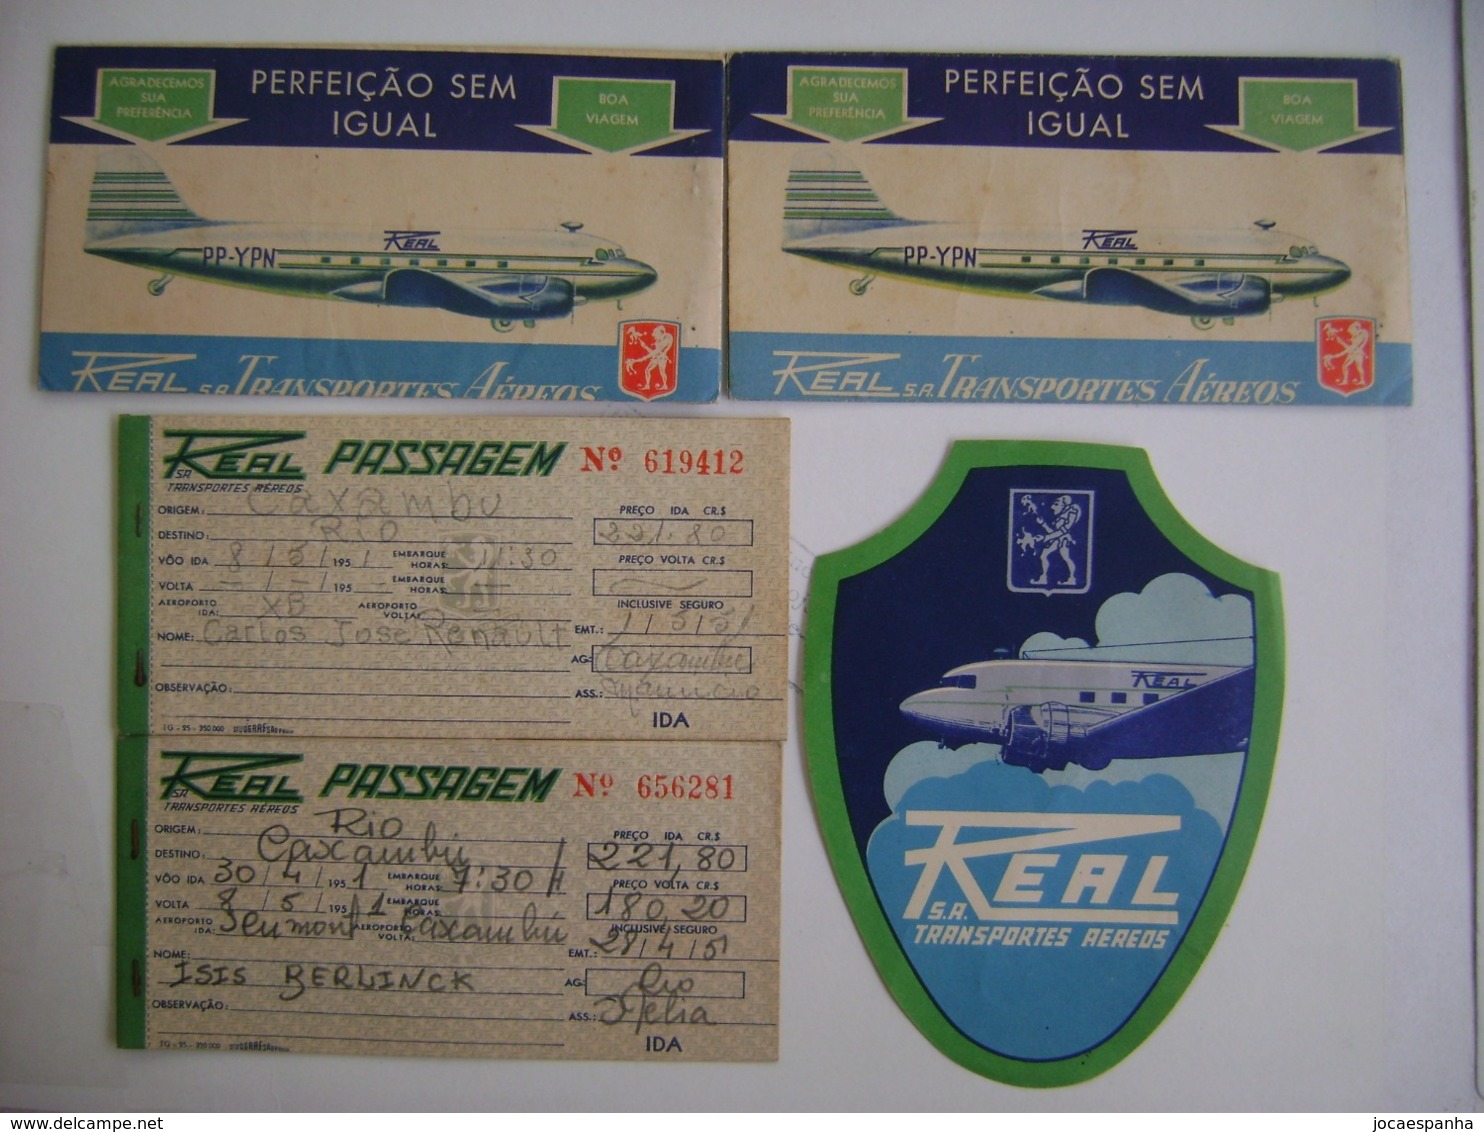 BRAZIL - A LUGGAGE LABEL AND 2 PASSAGES FROM THE REAL AIR TRANSPORT COMPANY IN 1951 IN THE STATE - World